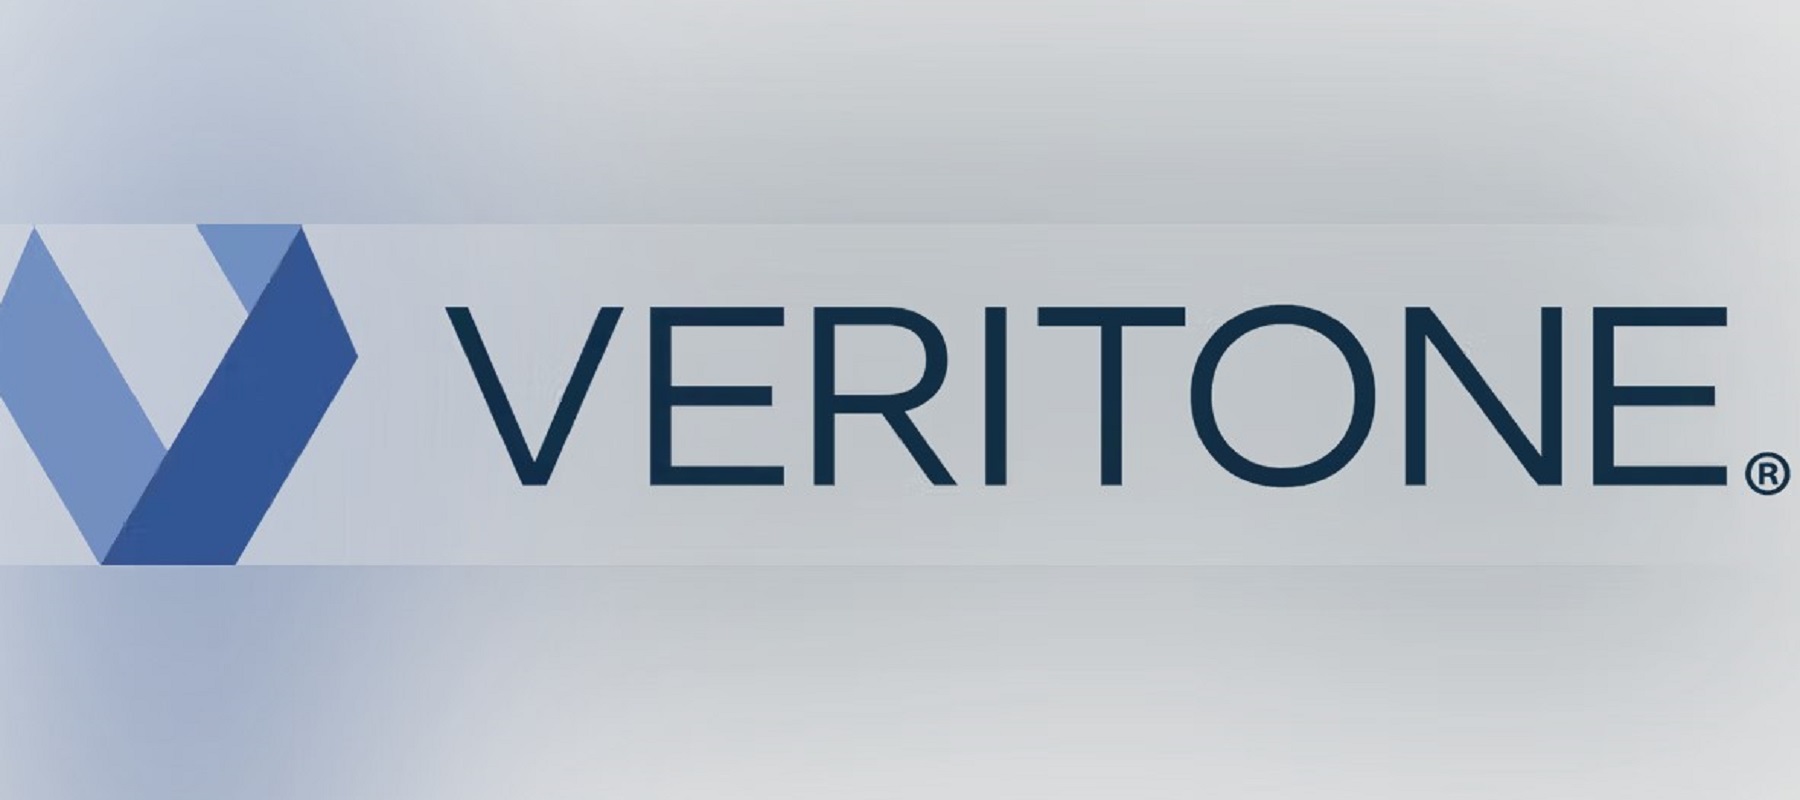 Veritone selected as exclusive ad sales and AI partner by SpokenLayer